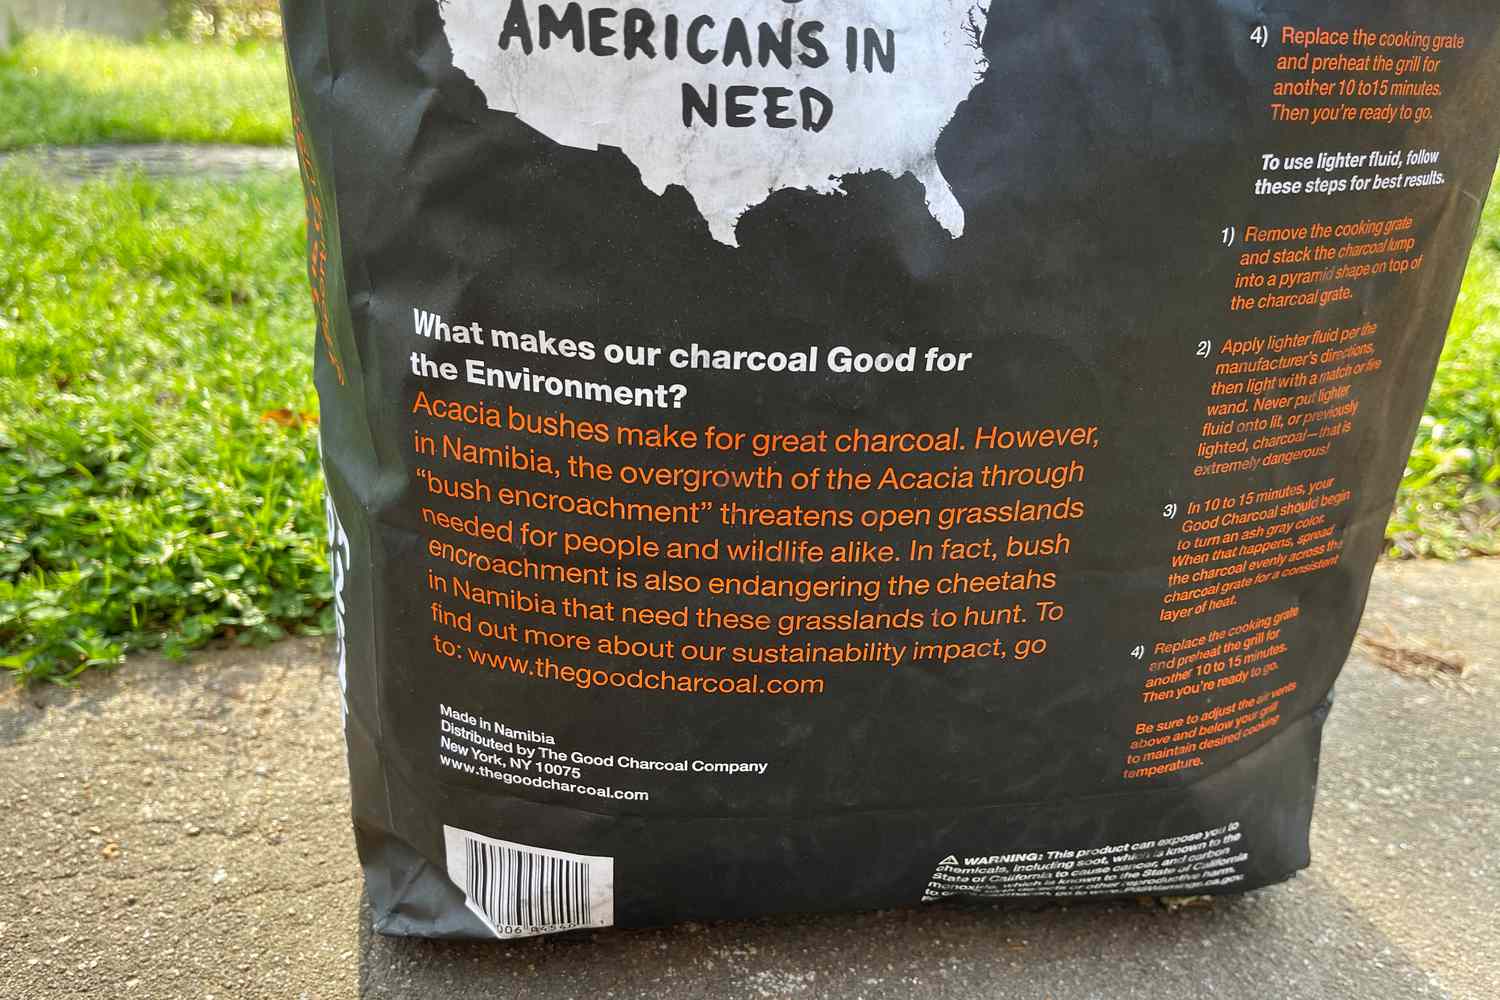 The Good Charcoal Company Lump Charcoal sack on the ground 